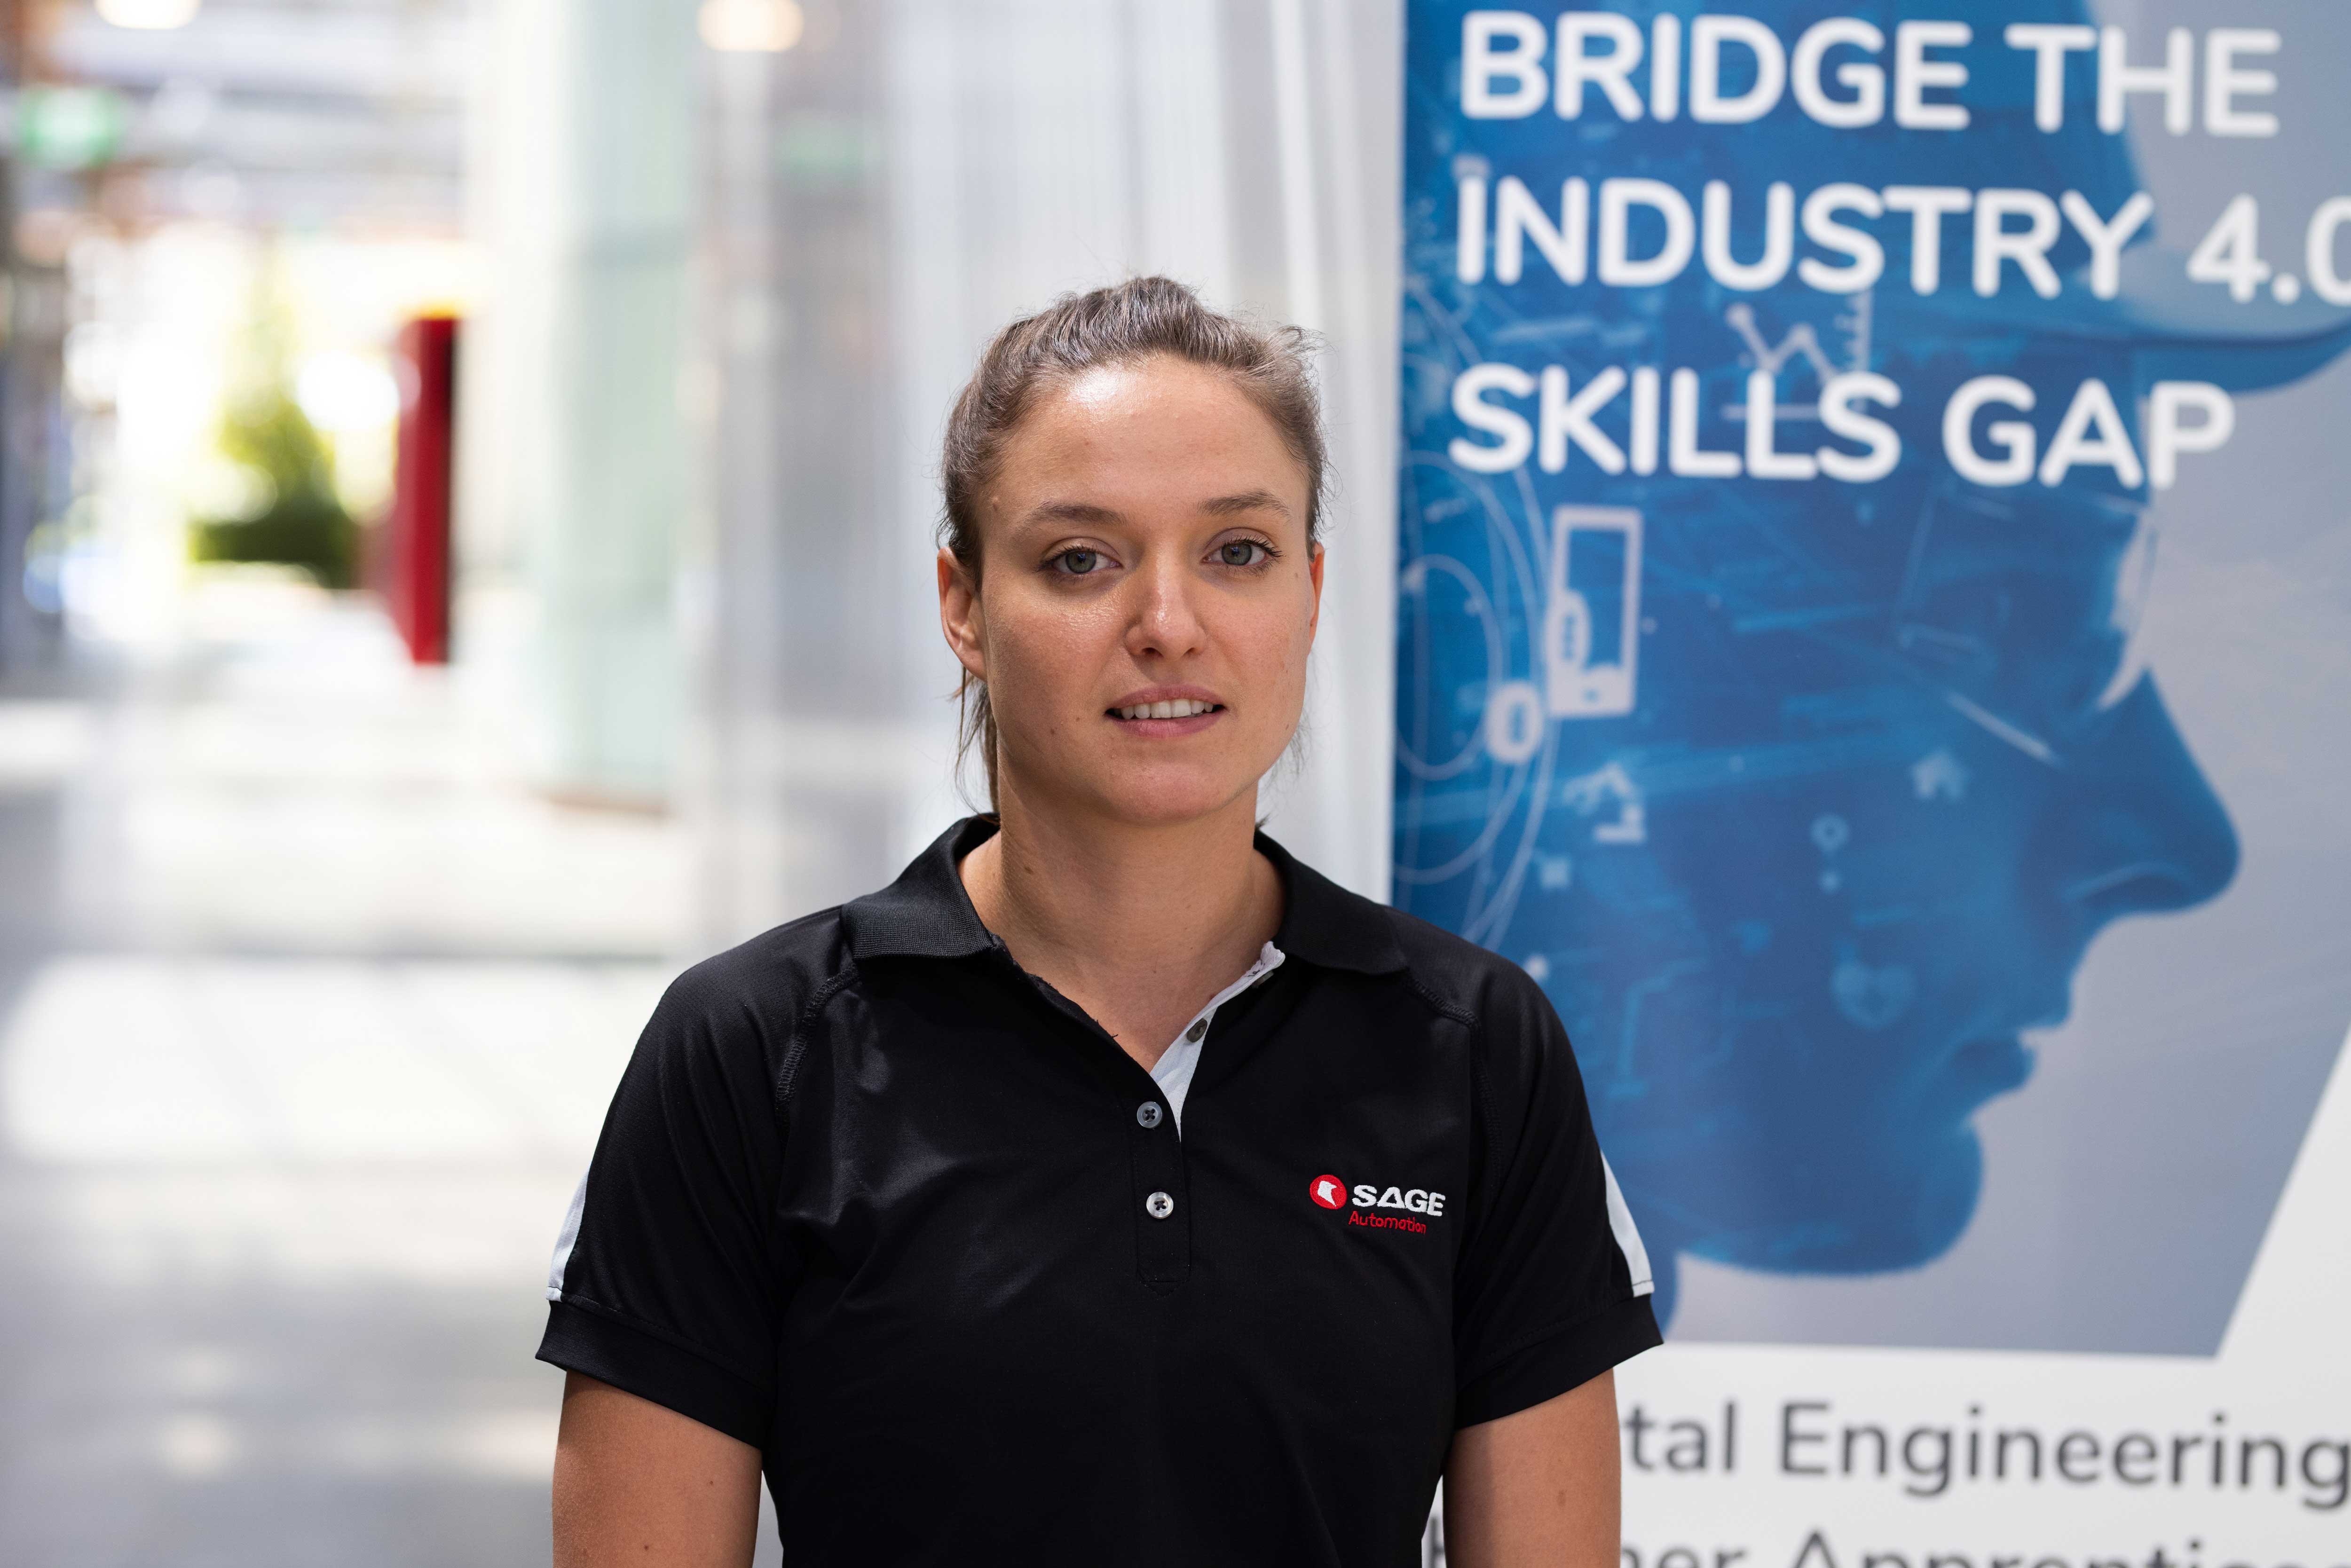 The nation’s first Digital Engineering Apprentices have been set to work in top-tier firms looking to fill an emerging skills gap in digital literacy.